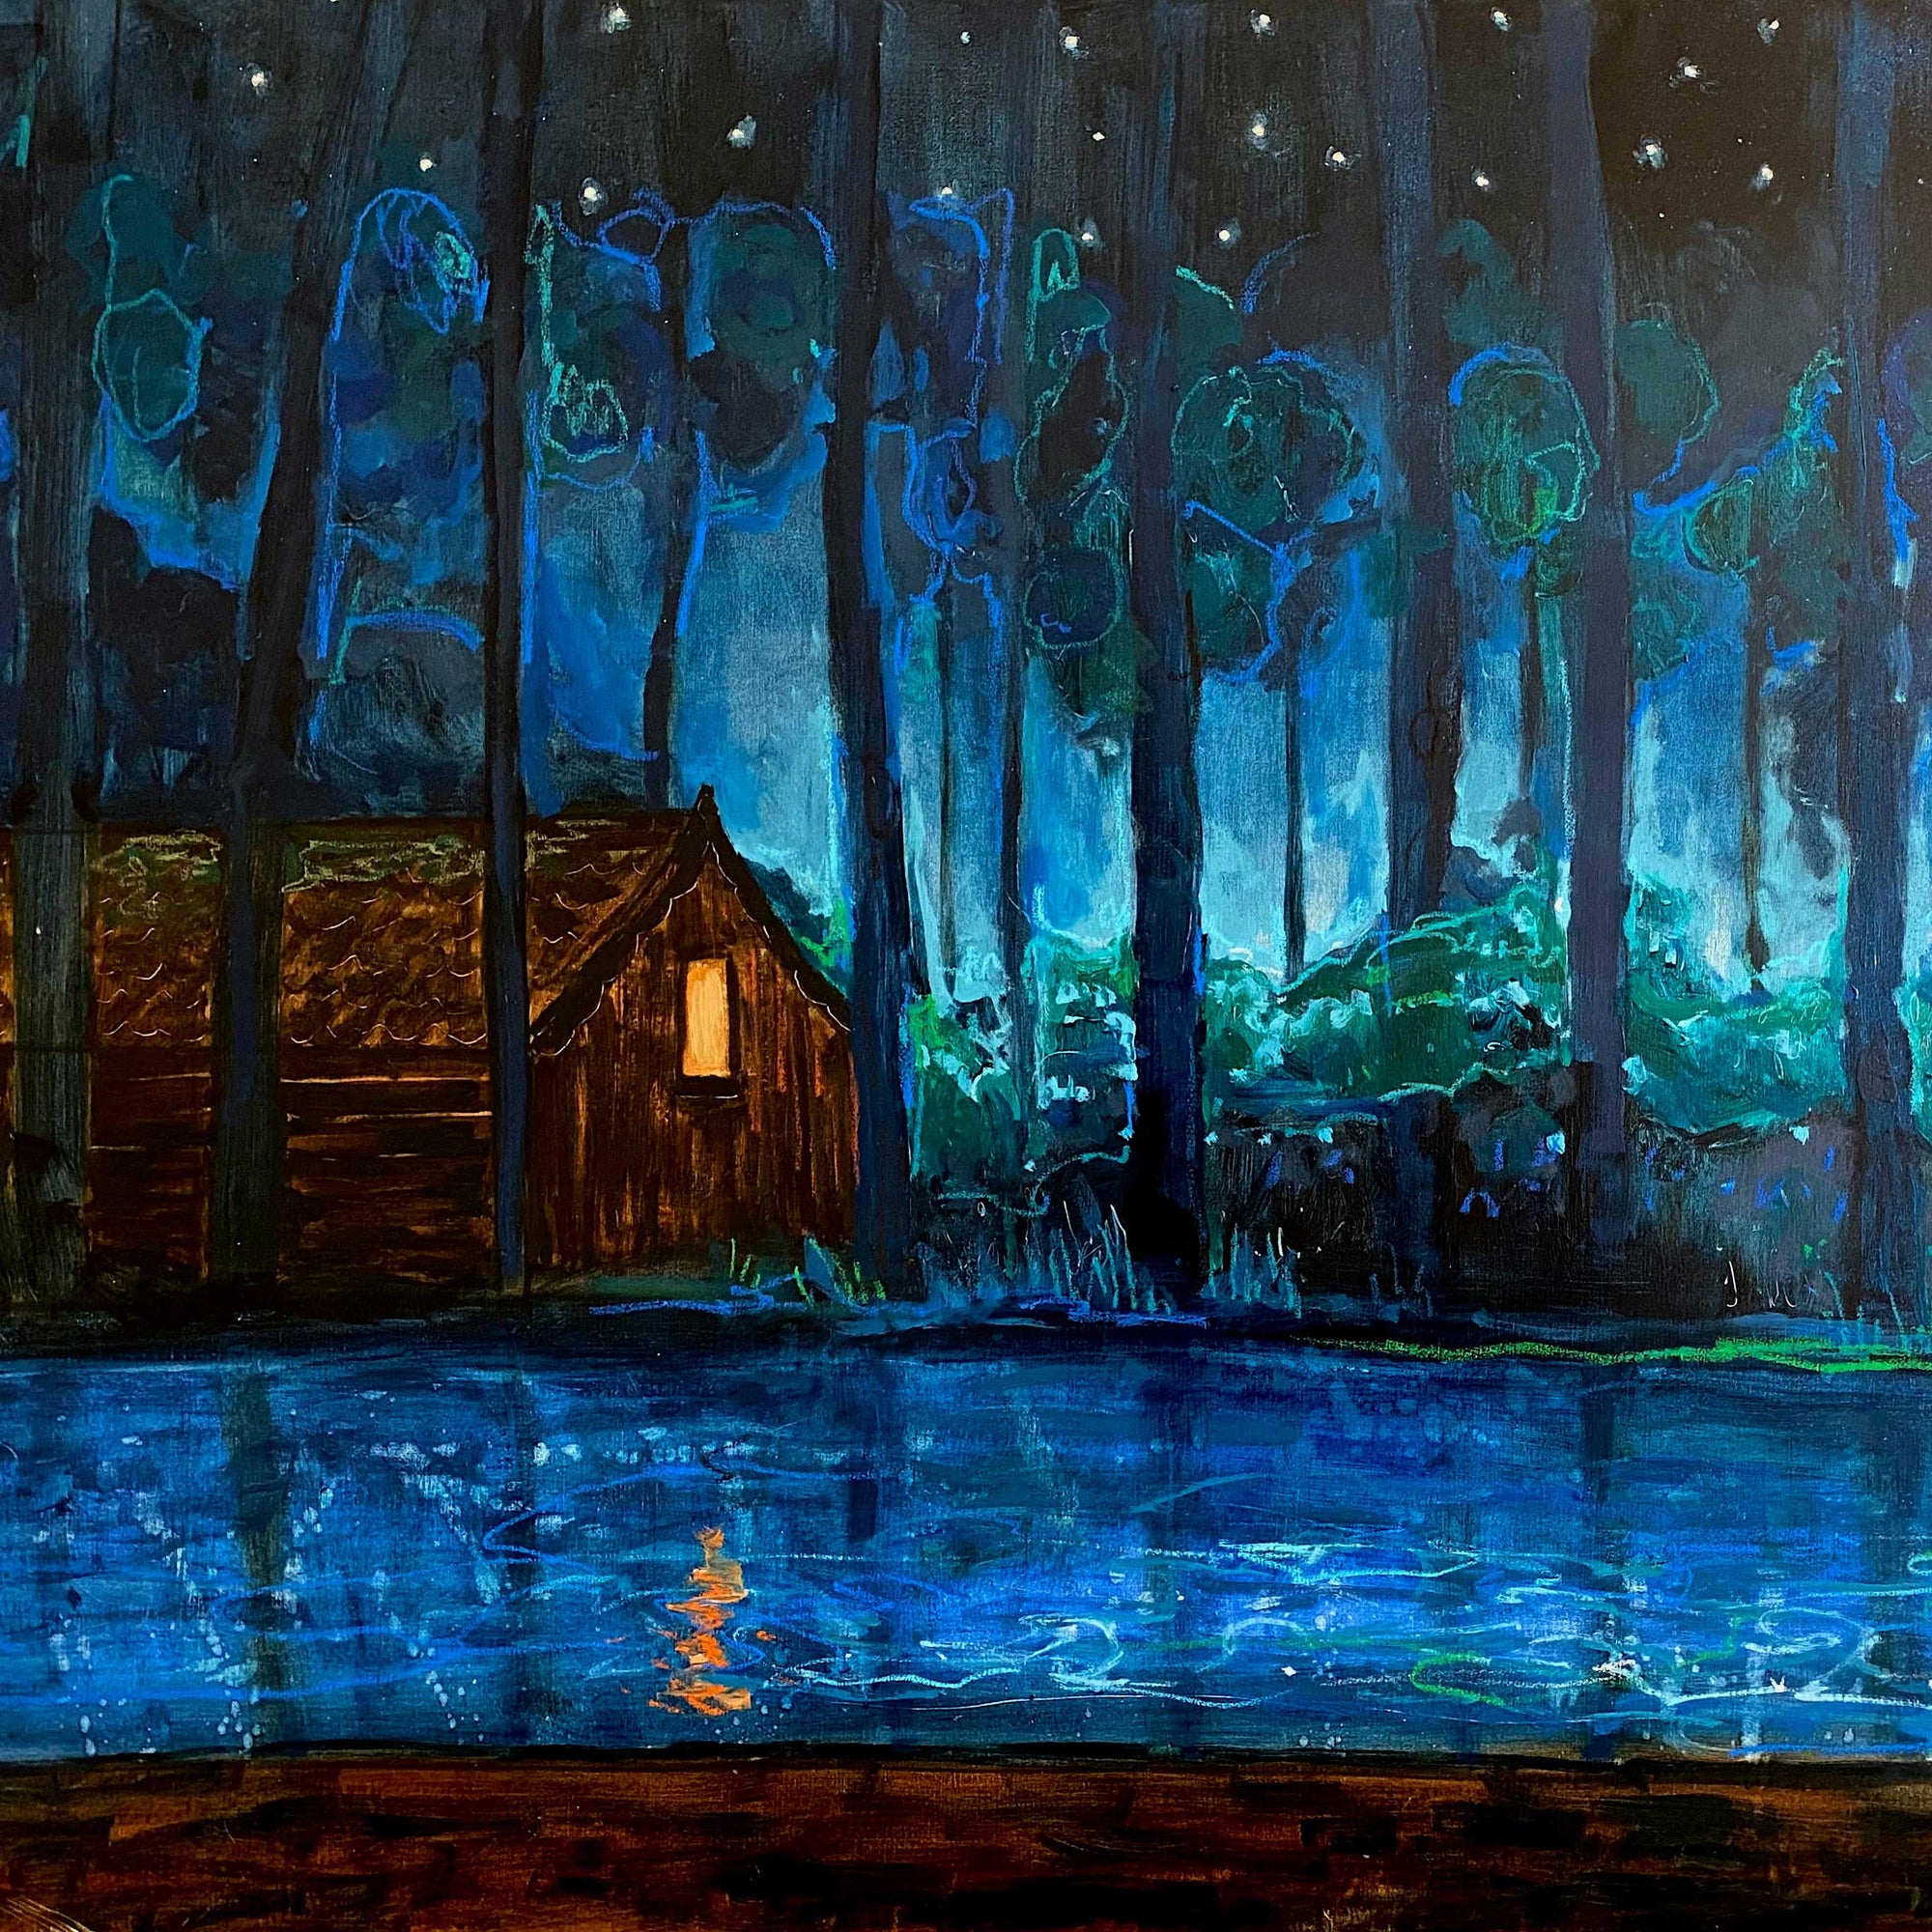 Magical Woodlands - original oil paintings by our new partner artist Bryony Knight